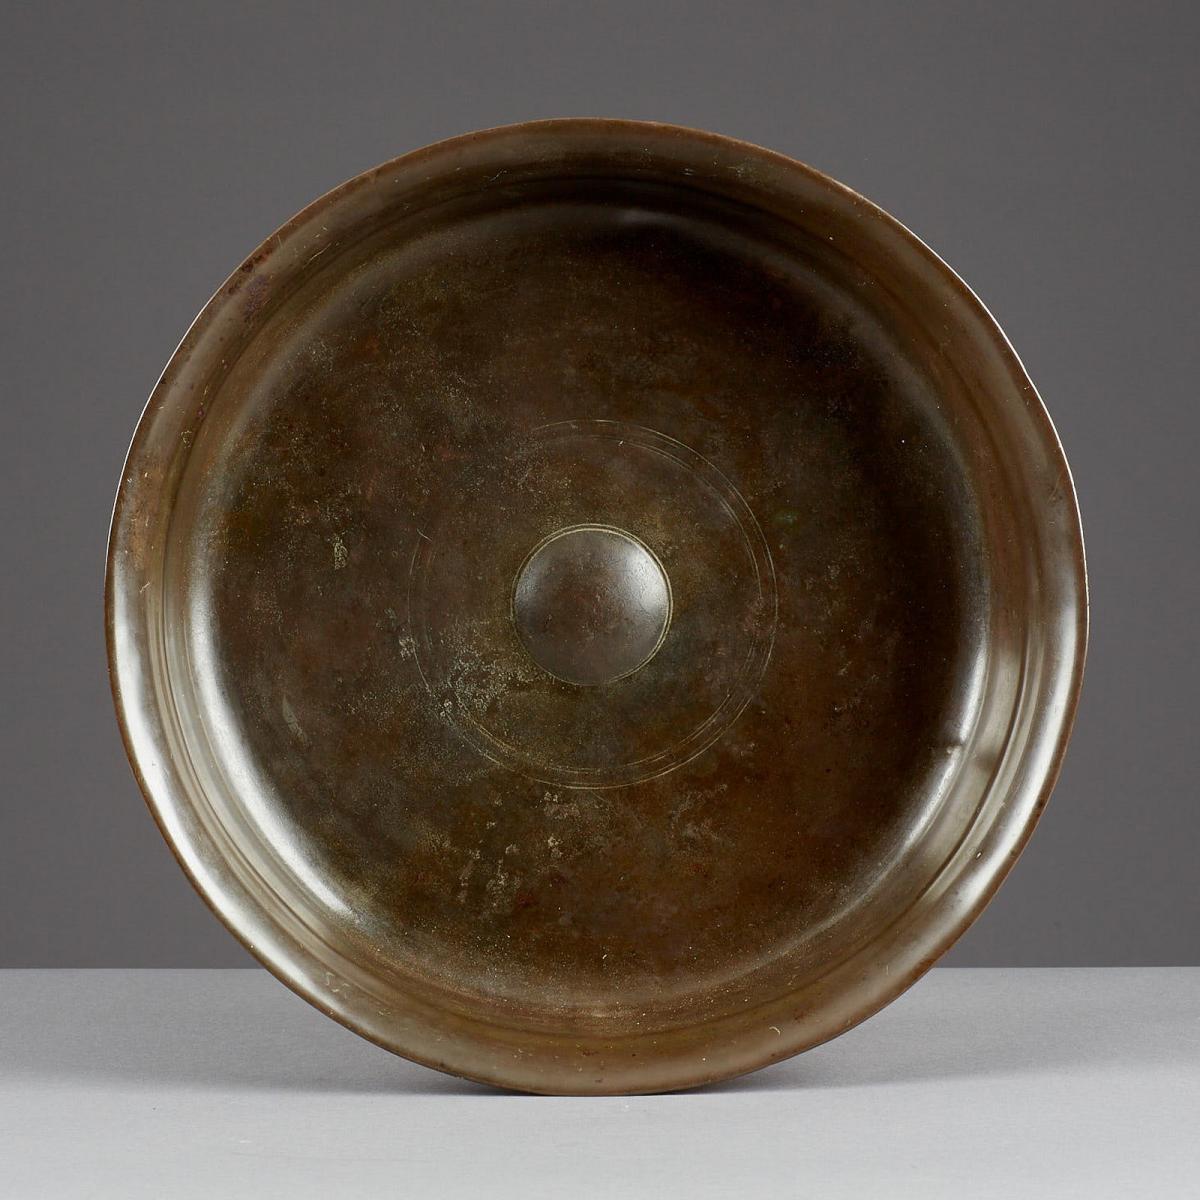 Large Late 16th / Early 17th Century Copper Alloy Bowl  Dutch or German  Circa 1600 - 1620